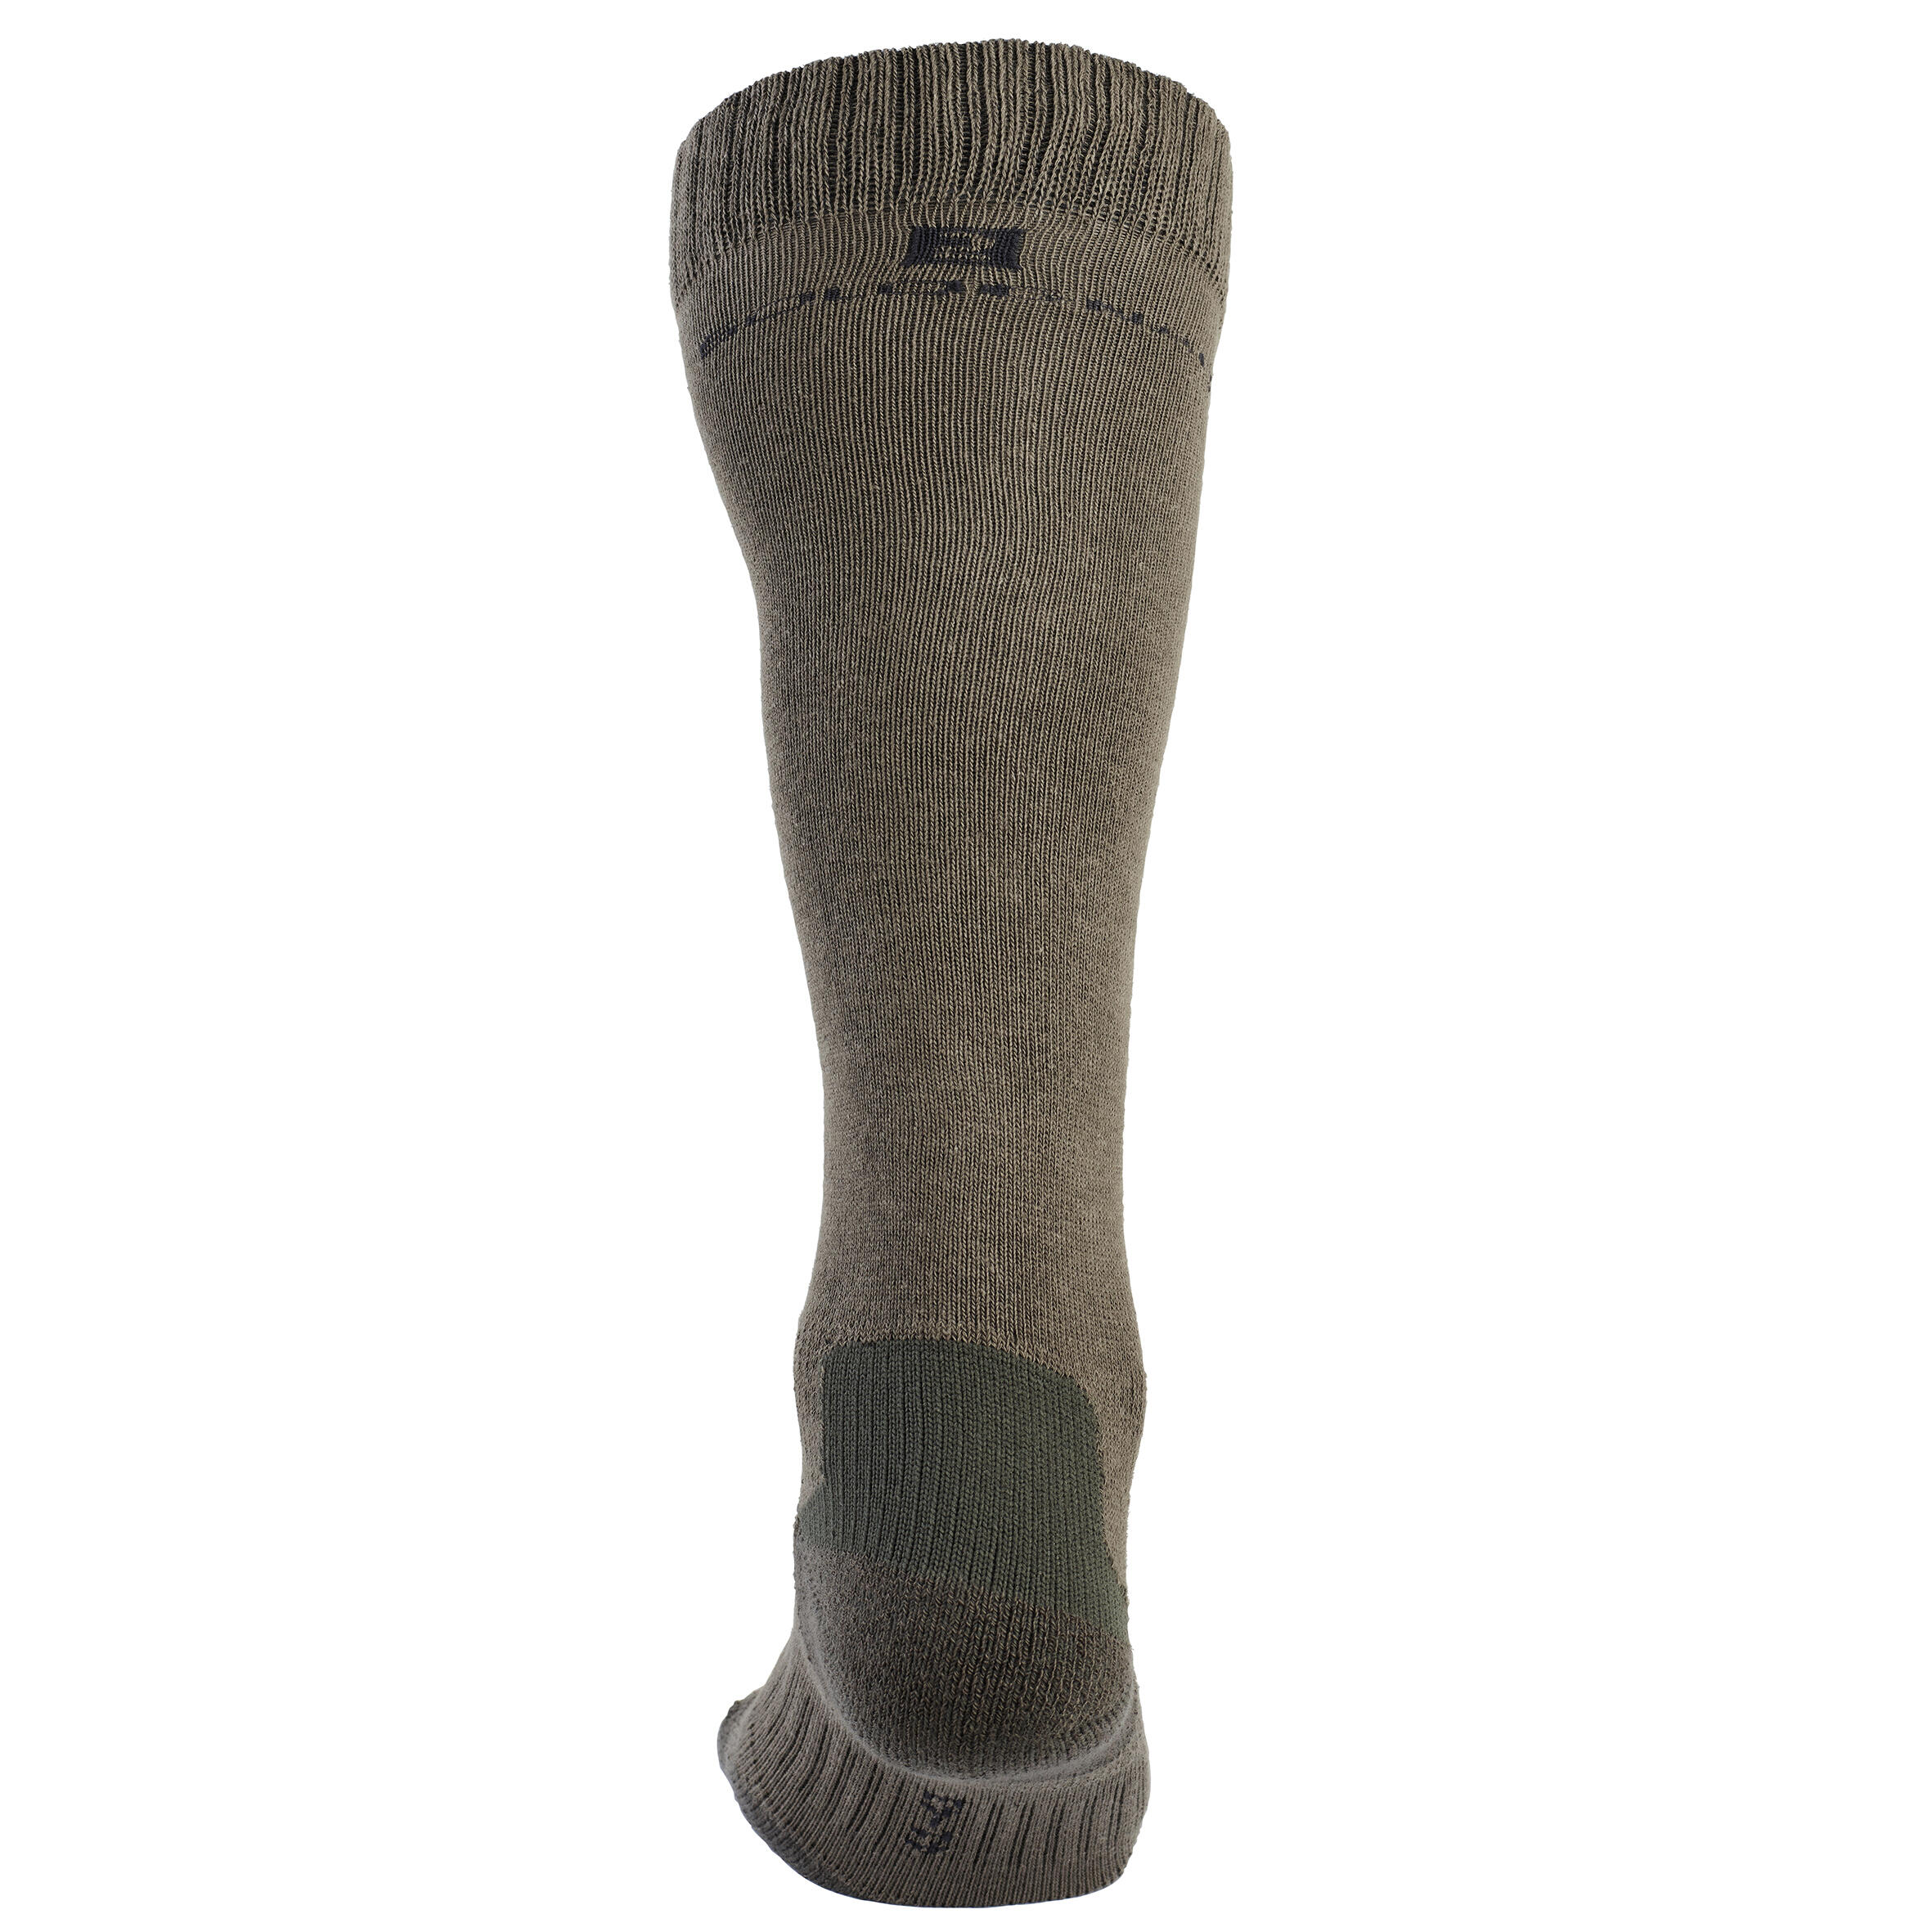 PACK OF 2 PAIRS OF BREATHABLE TALL HUNTING SOCKS 100 10/10